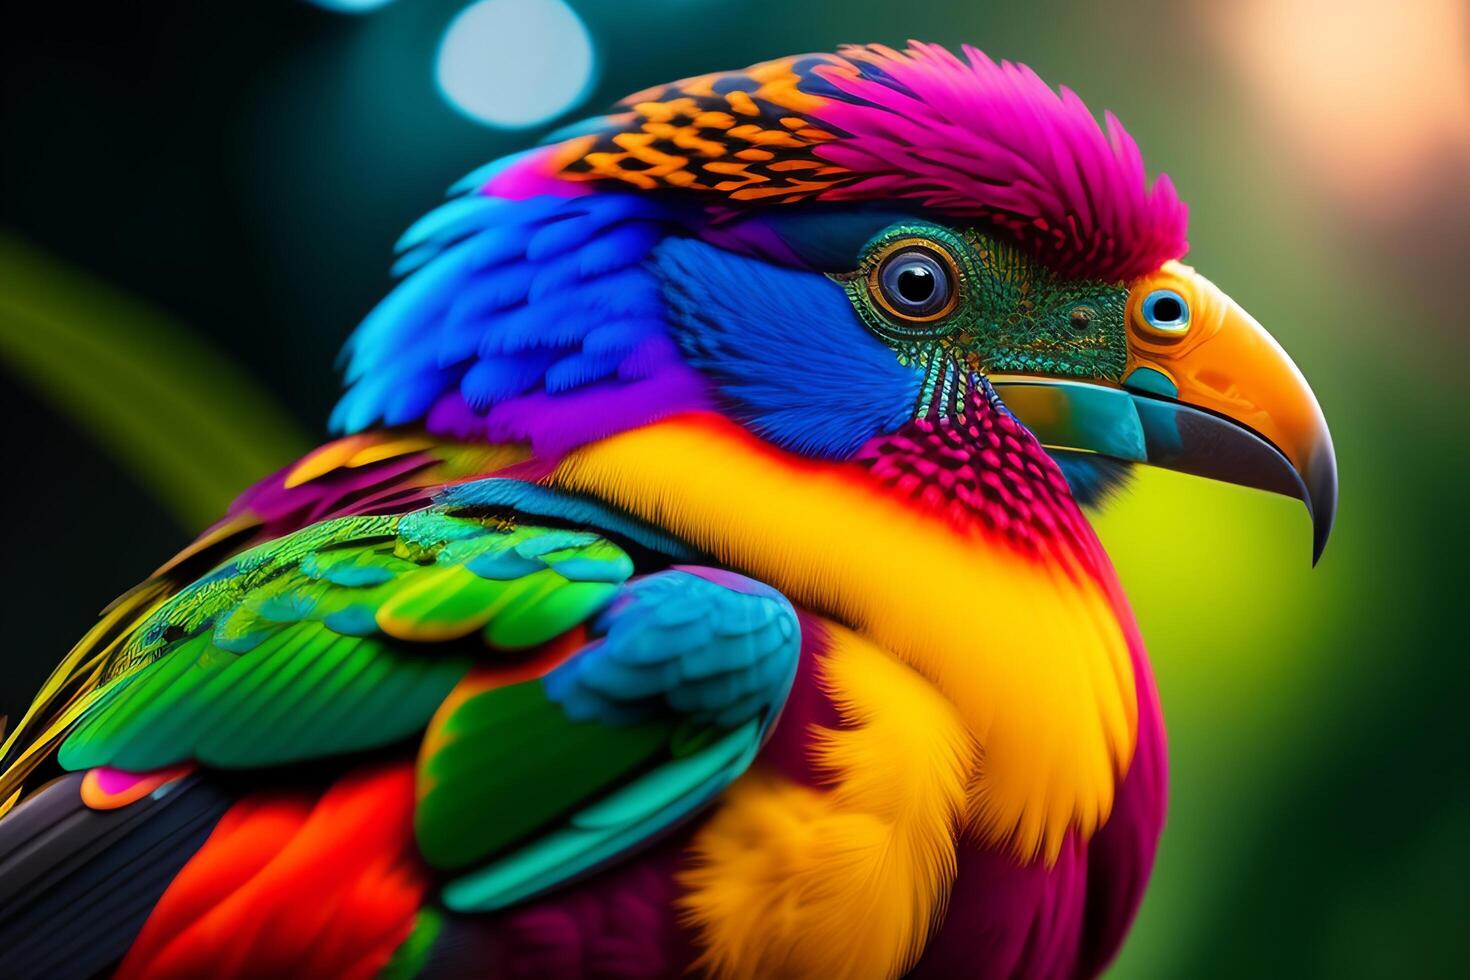 Colorful macaw parrot sitting on colorful bokeh background. photo